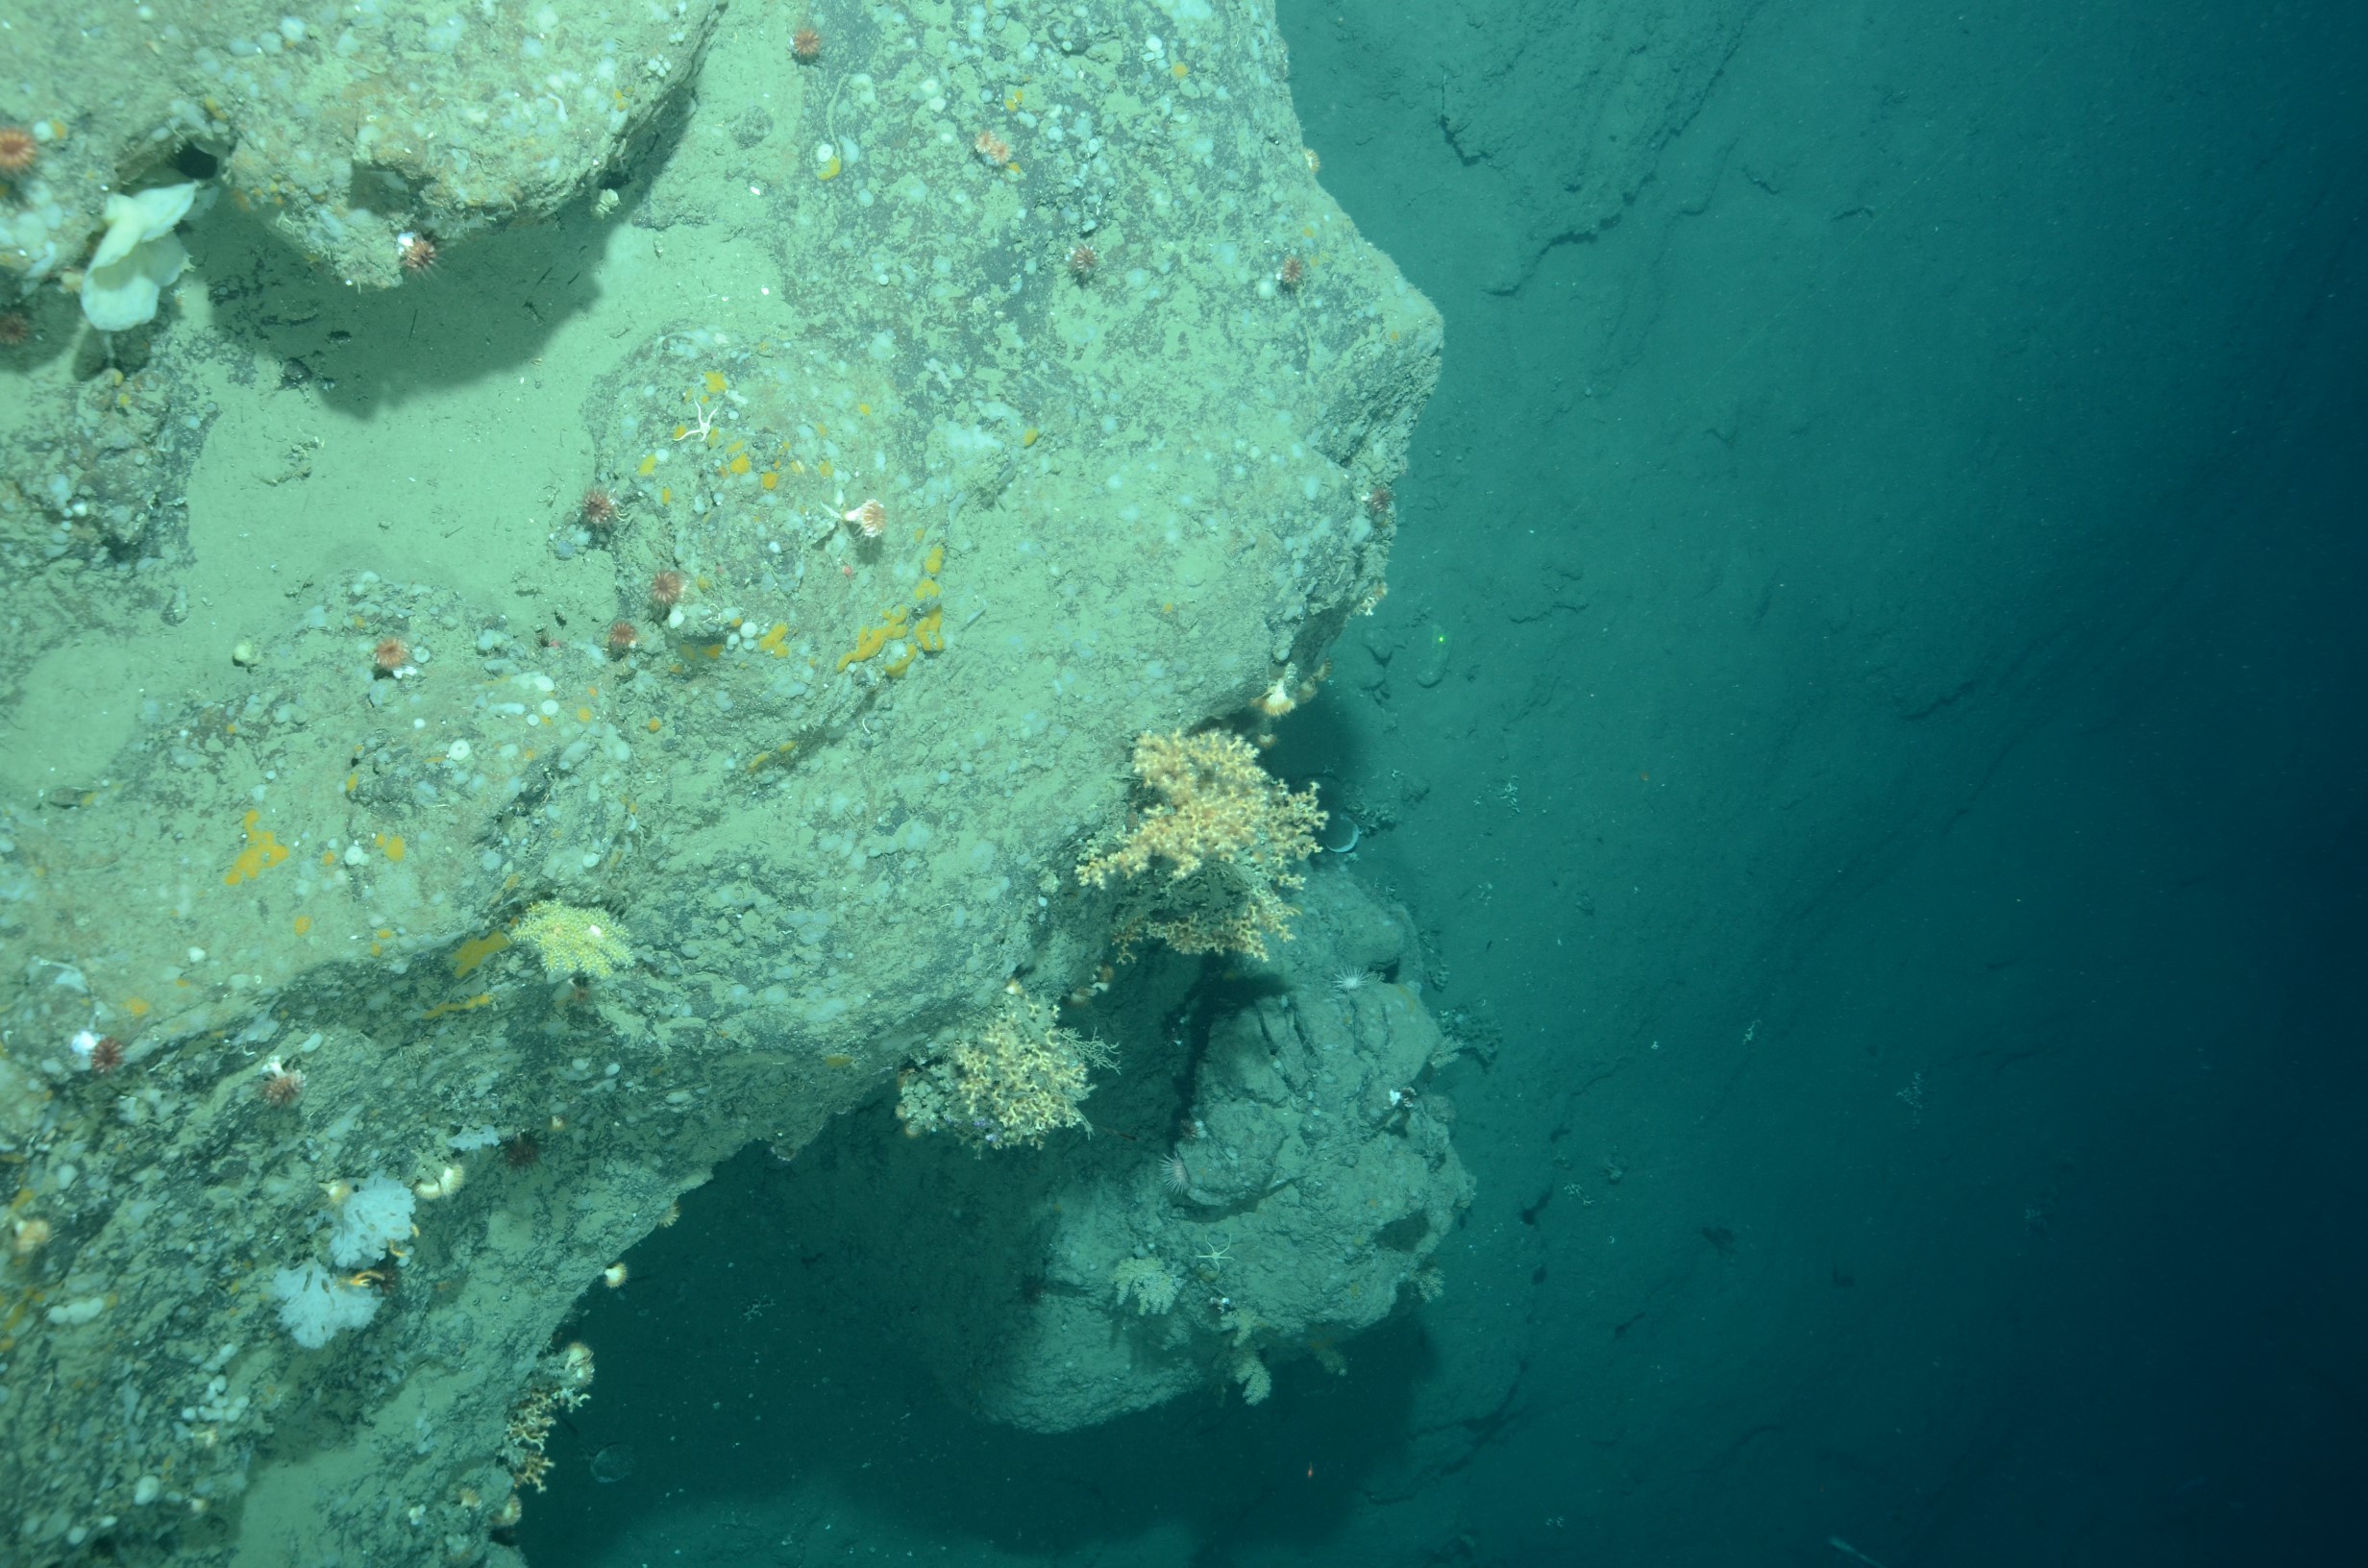 Rocky outcrop with hard corals (including scleratinian and solitary cup corals) and soft corals, white and encrusting sponges in Lindenkohl Canyon